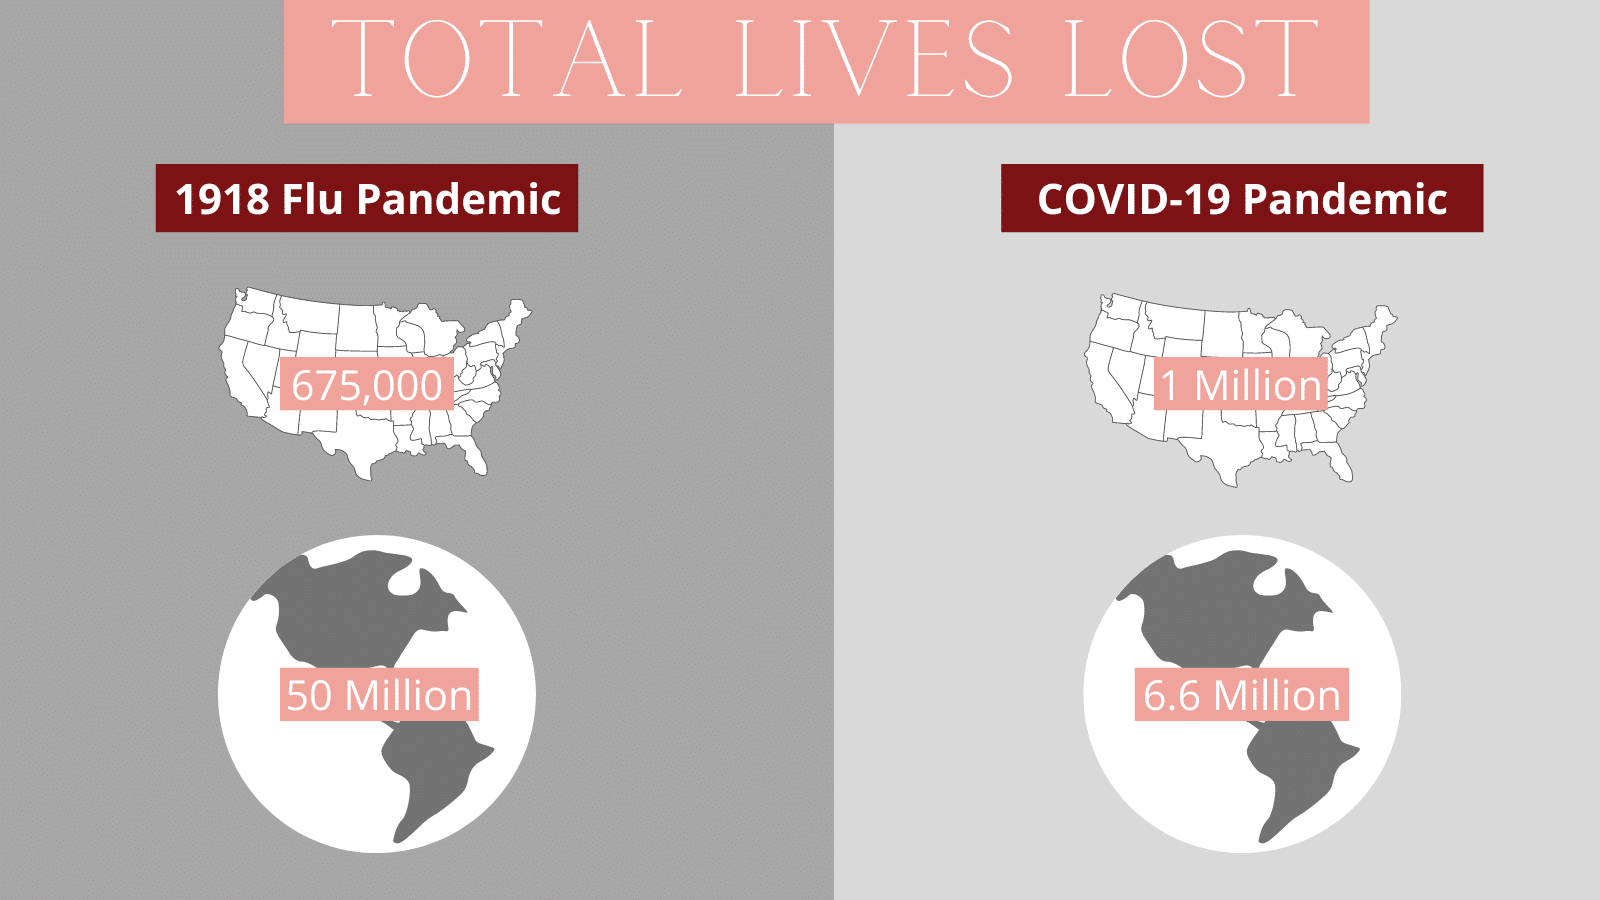 Comparing Lives Lost 1918 Spanish Flu to COVID-19